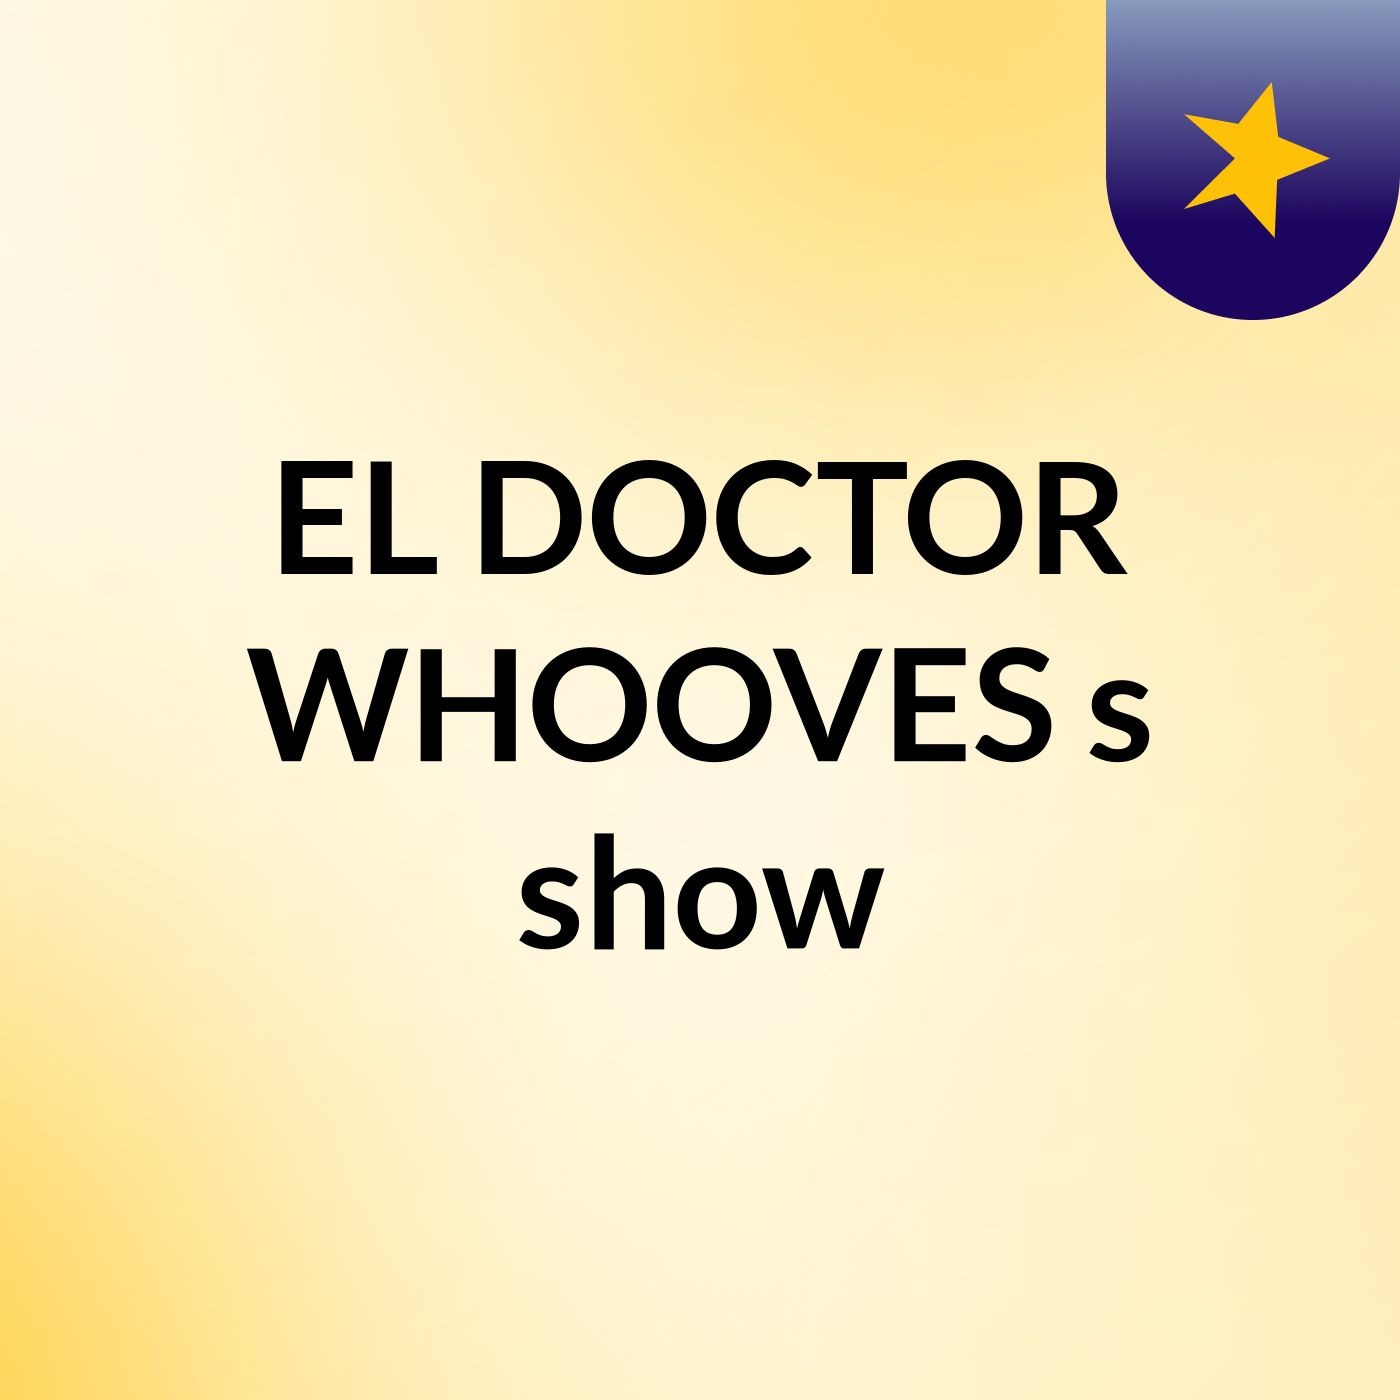 EL DOCTOR WHOOVES's show